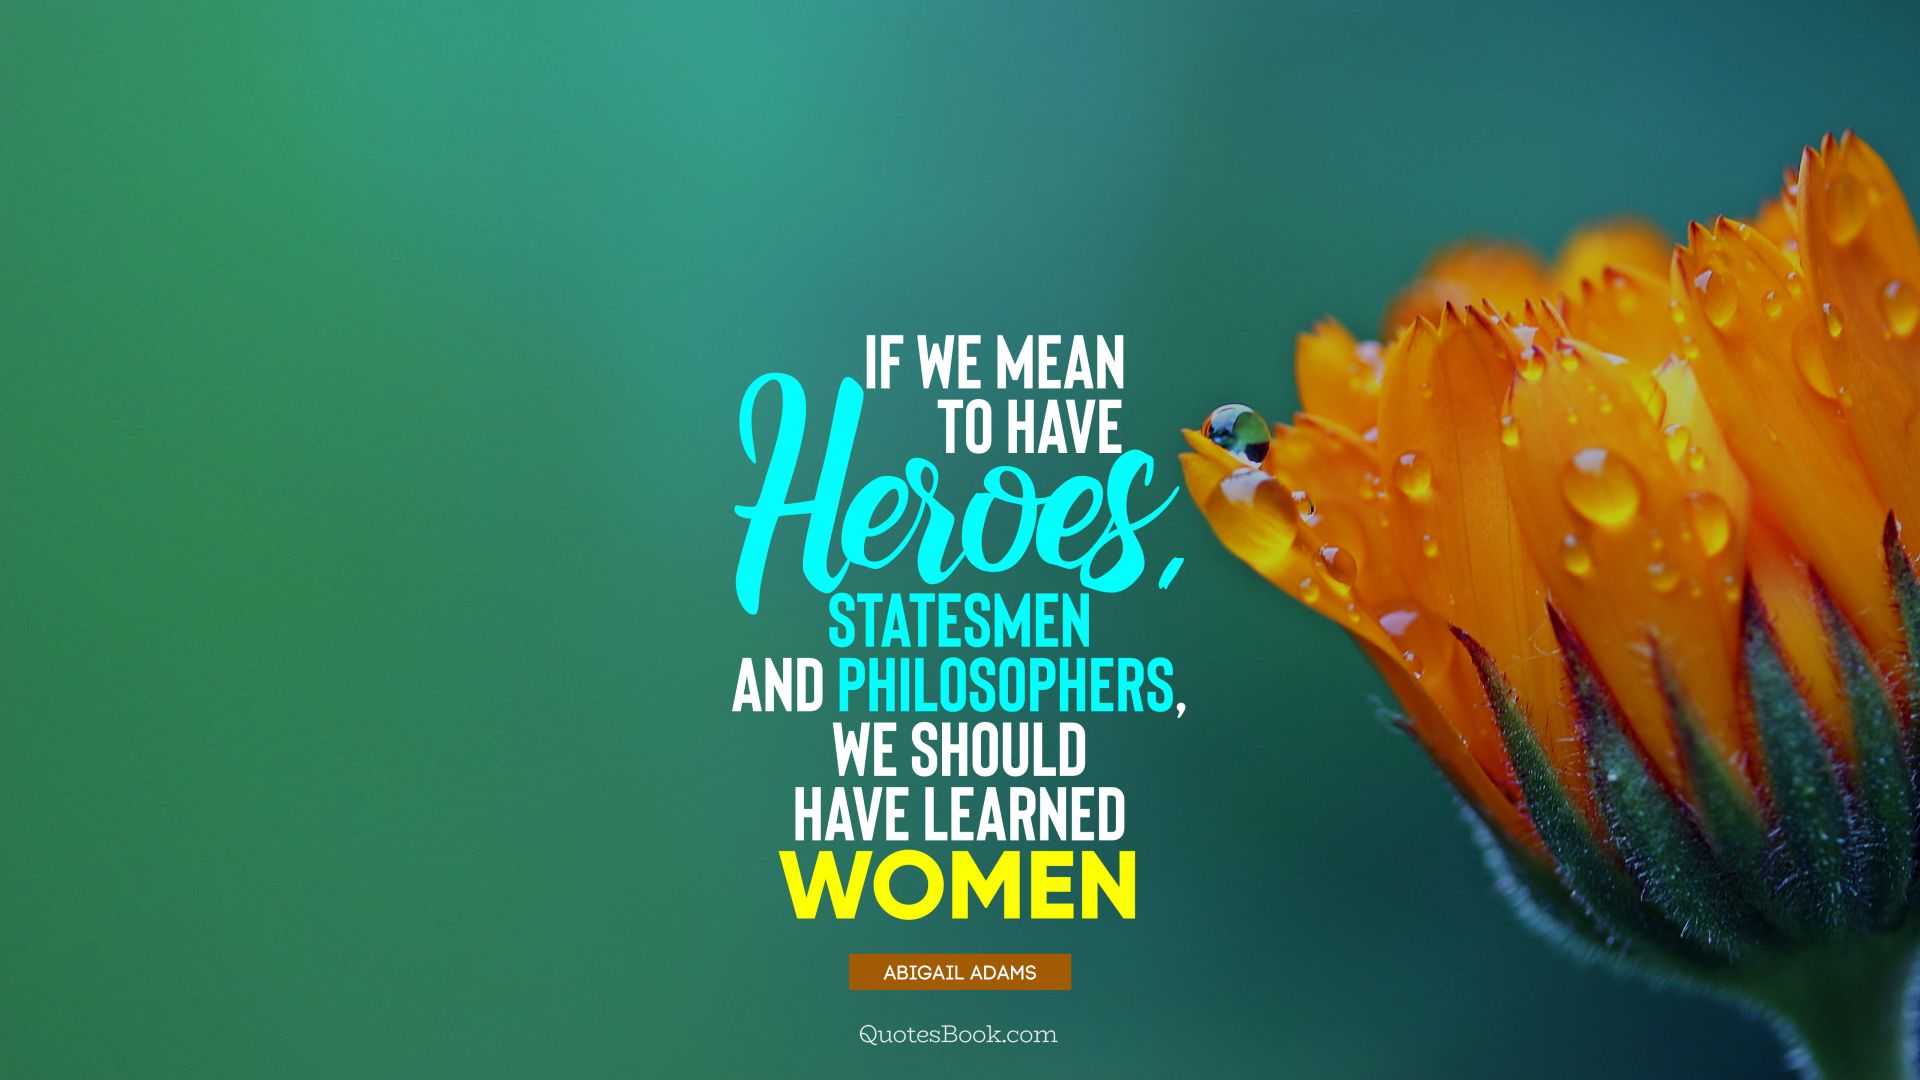 If we mean to have heroes, statesmen and philosophers, we should have learned women. - Quote by Abigail Adams